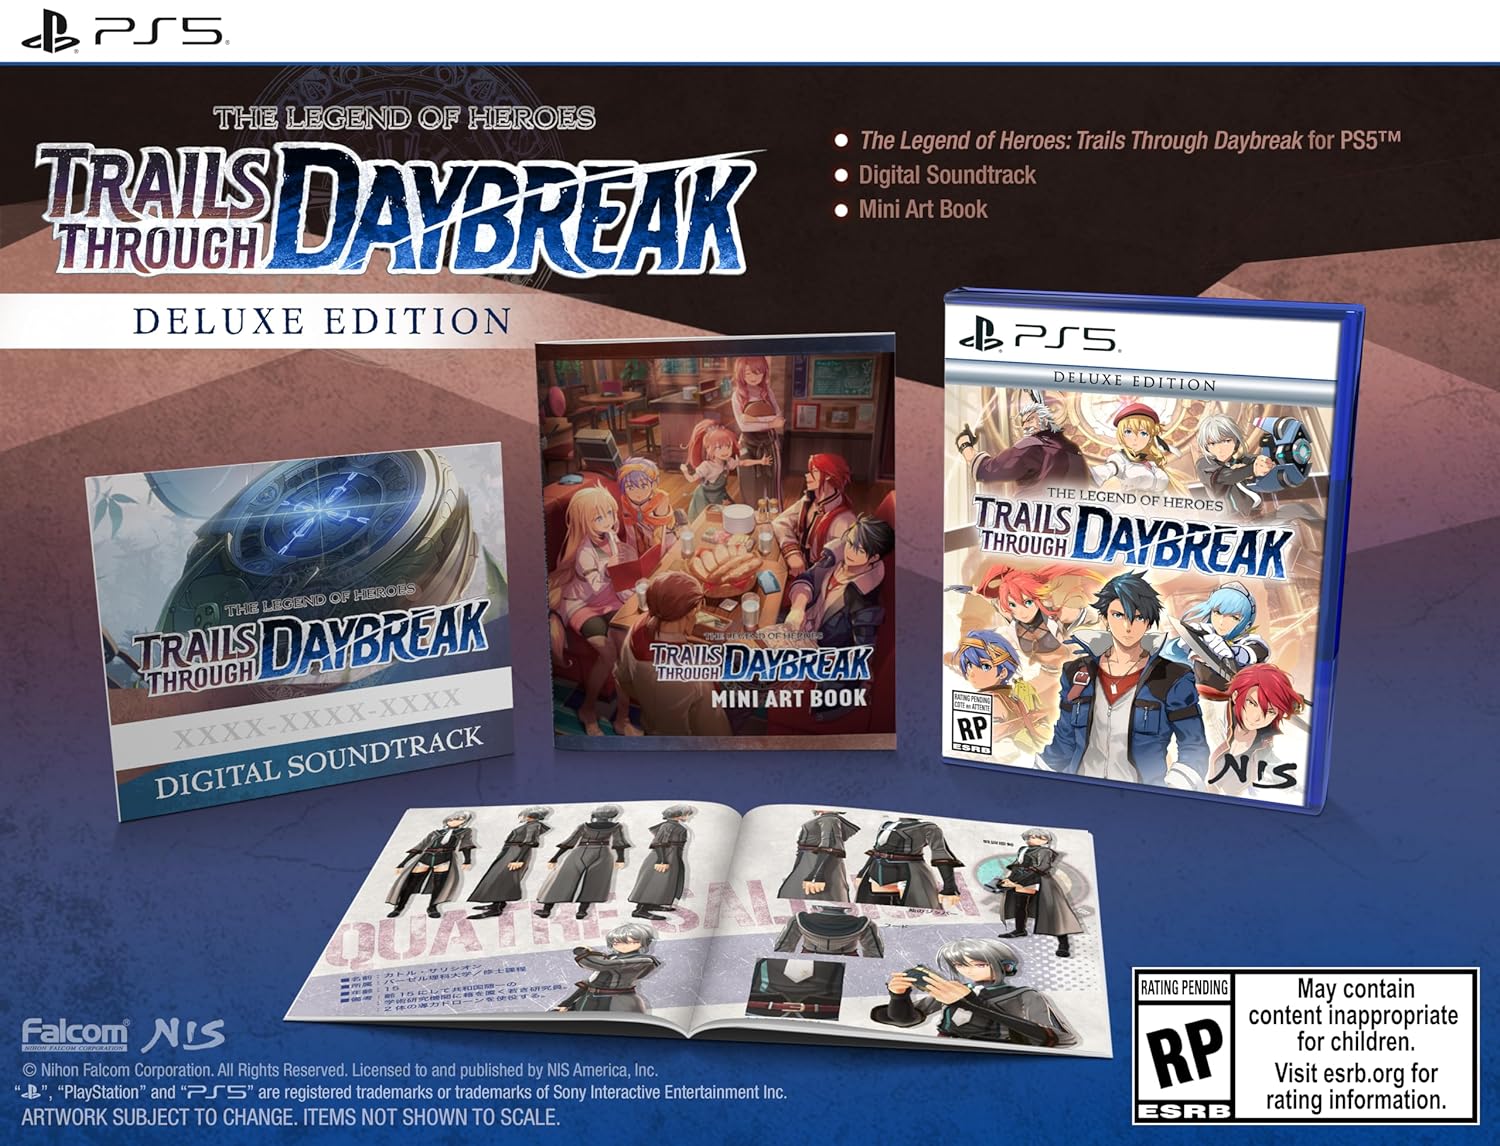 PS5 The Legend of Heroes: Trails through Daybreak [Deluxe Edition]